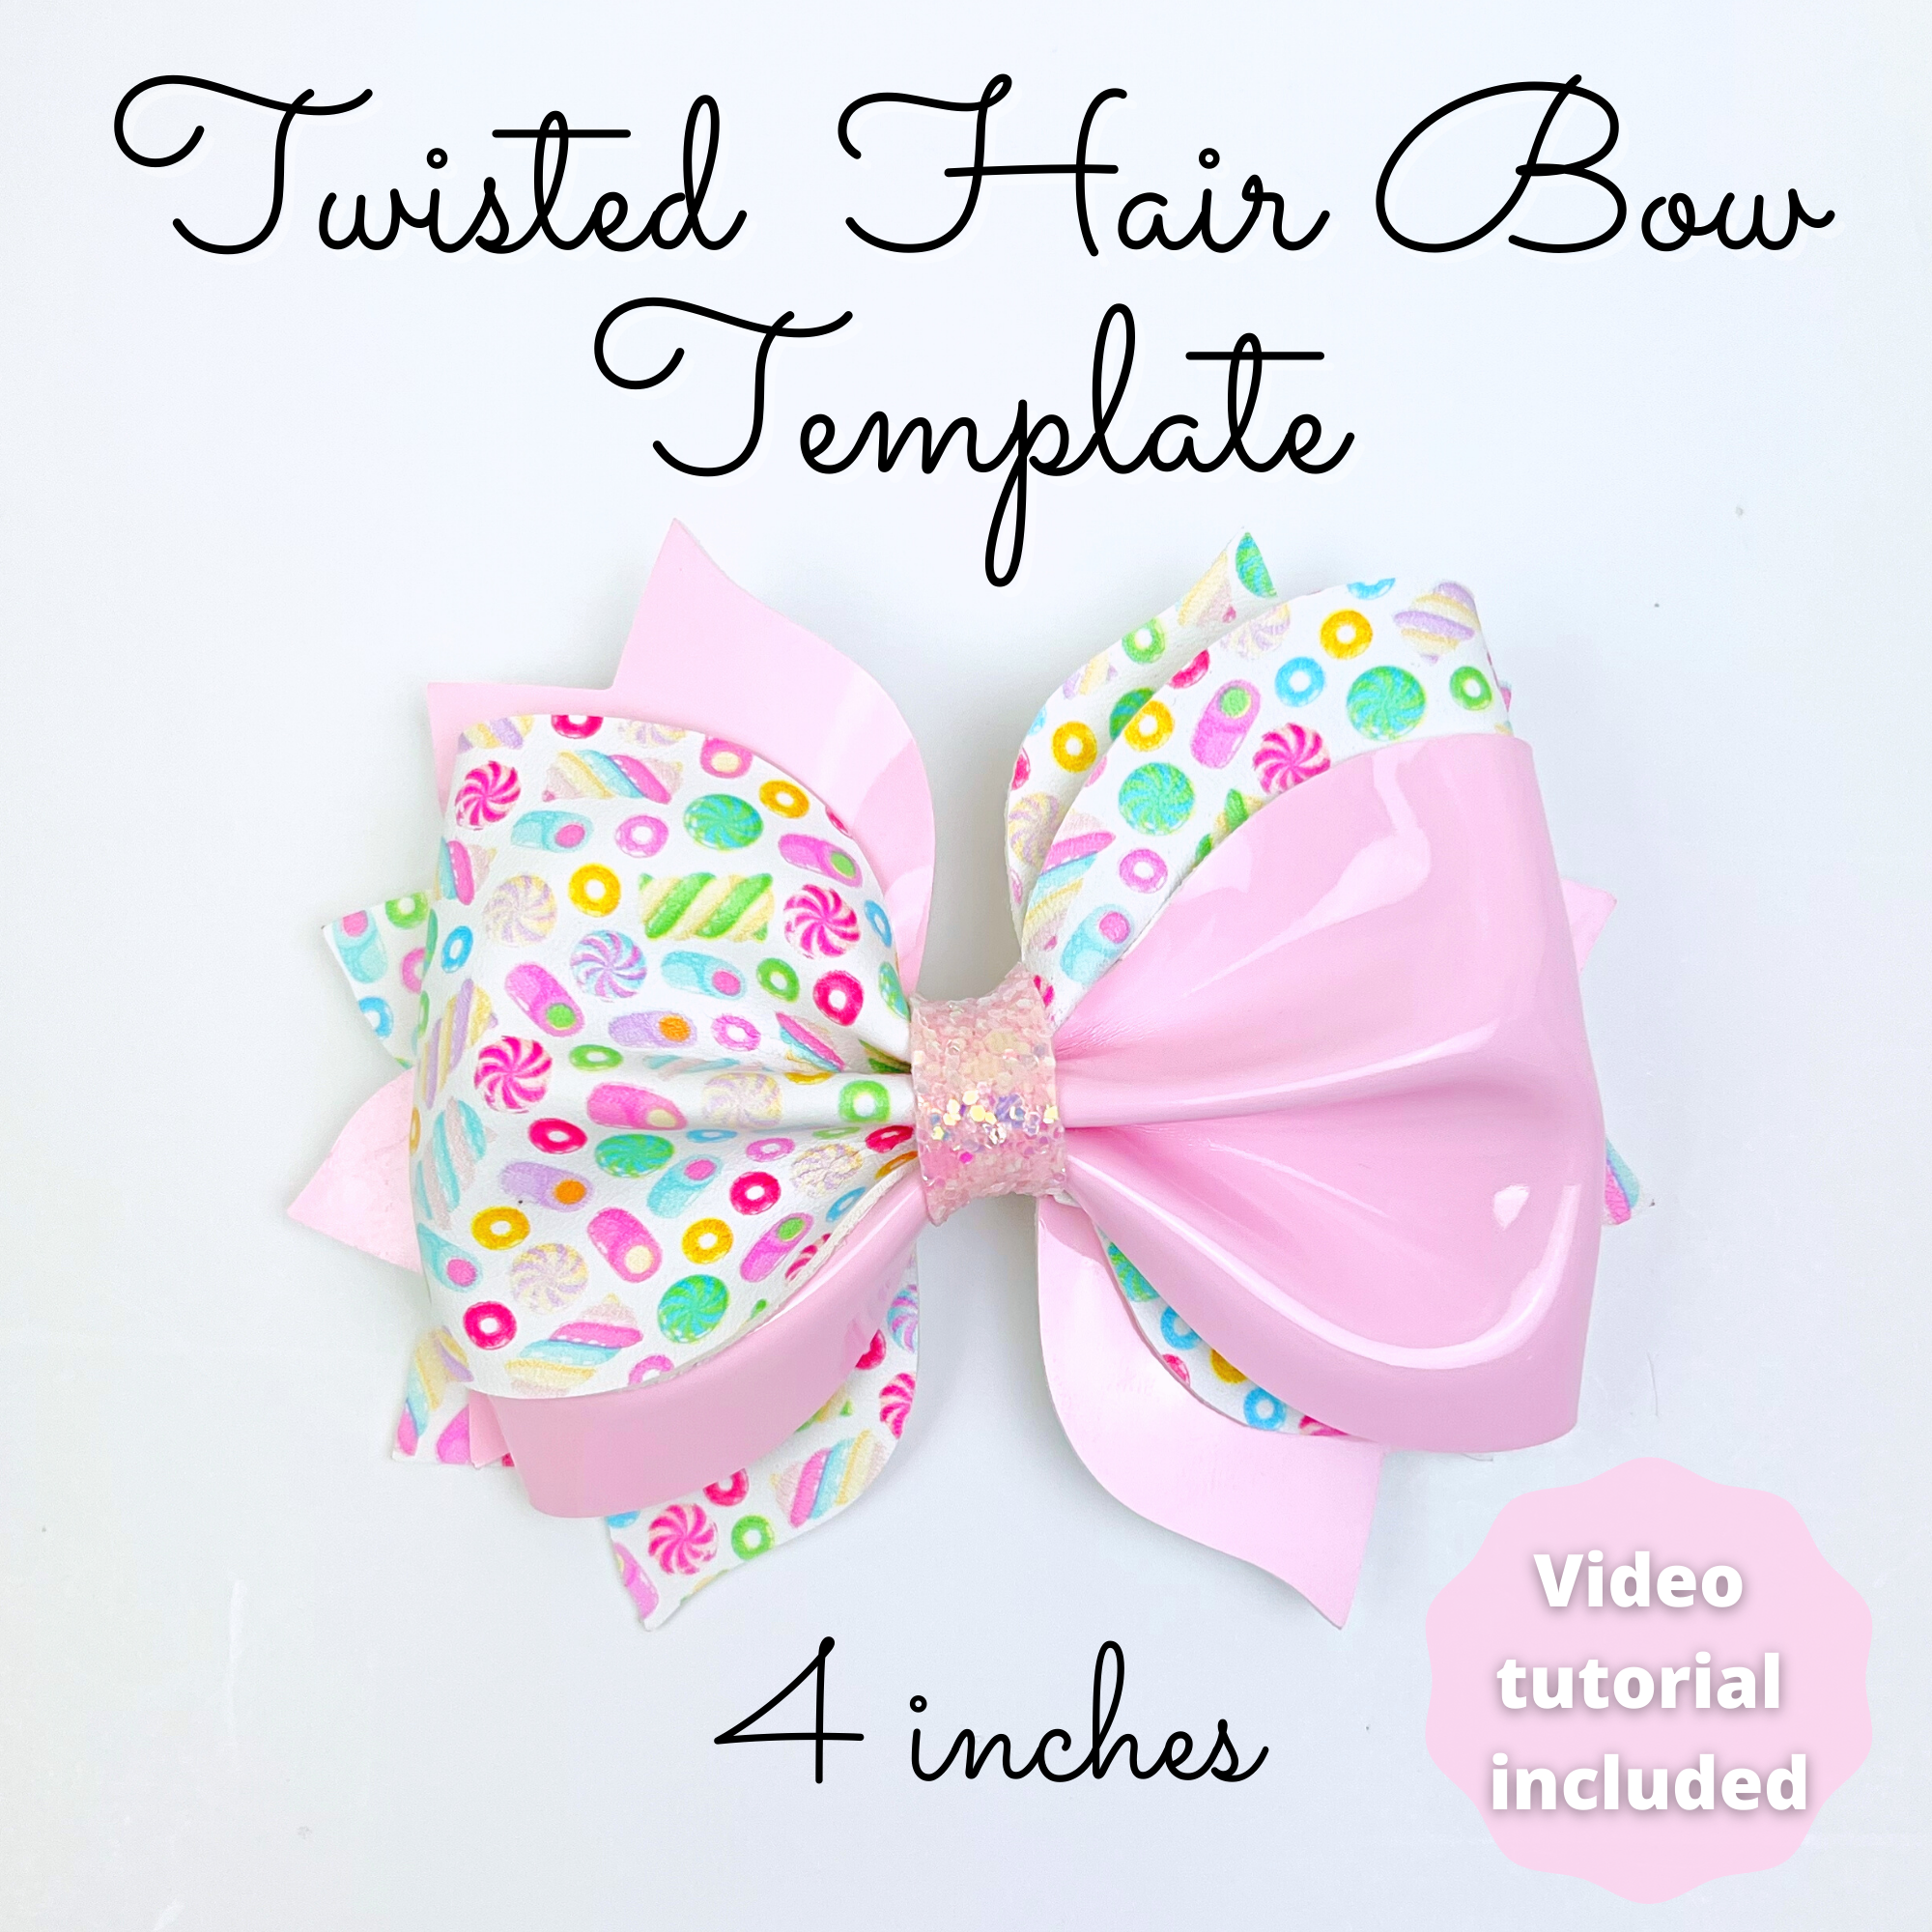 How to Make Leather Hair Bows with Your Cricut